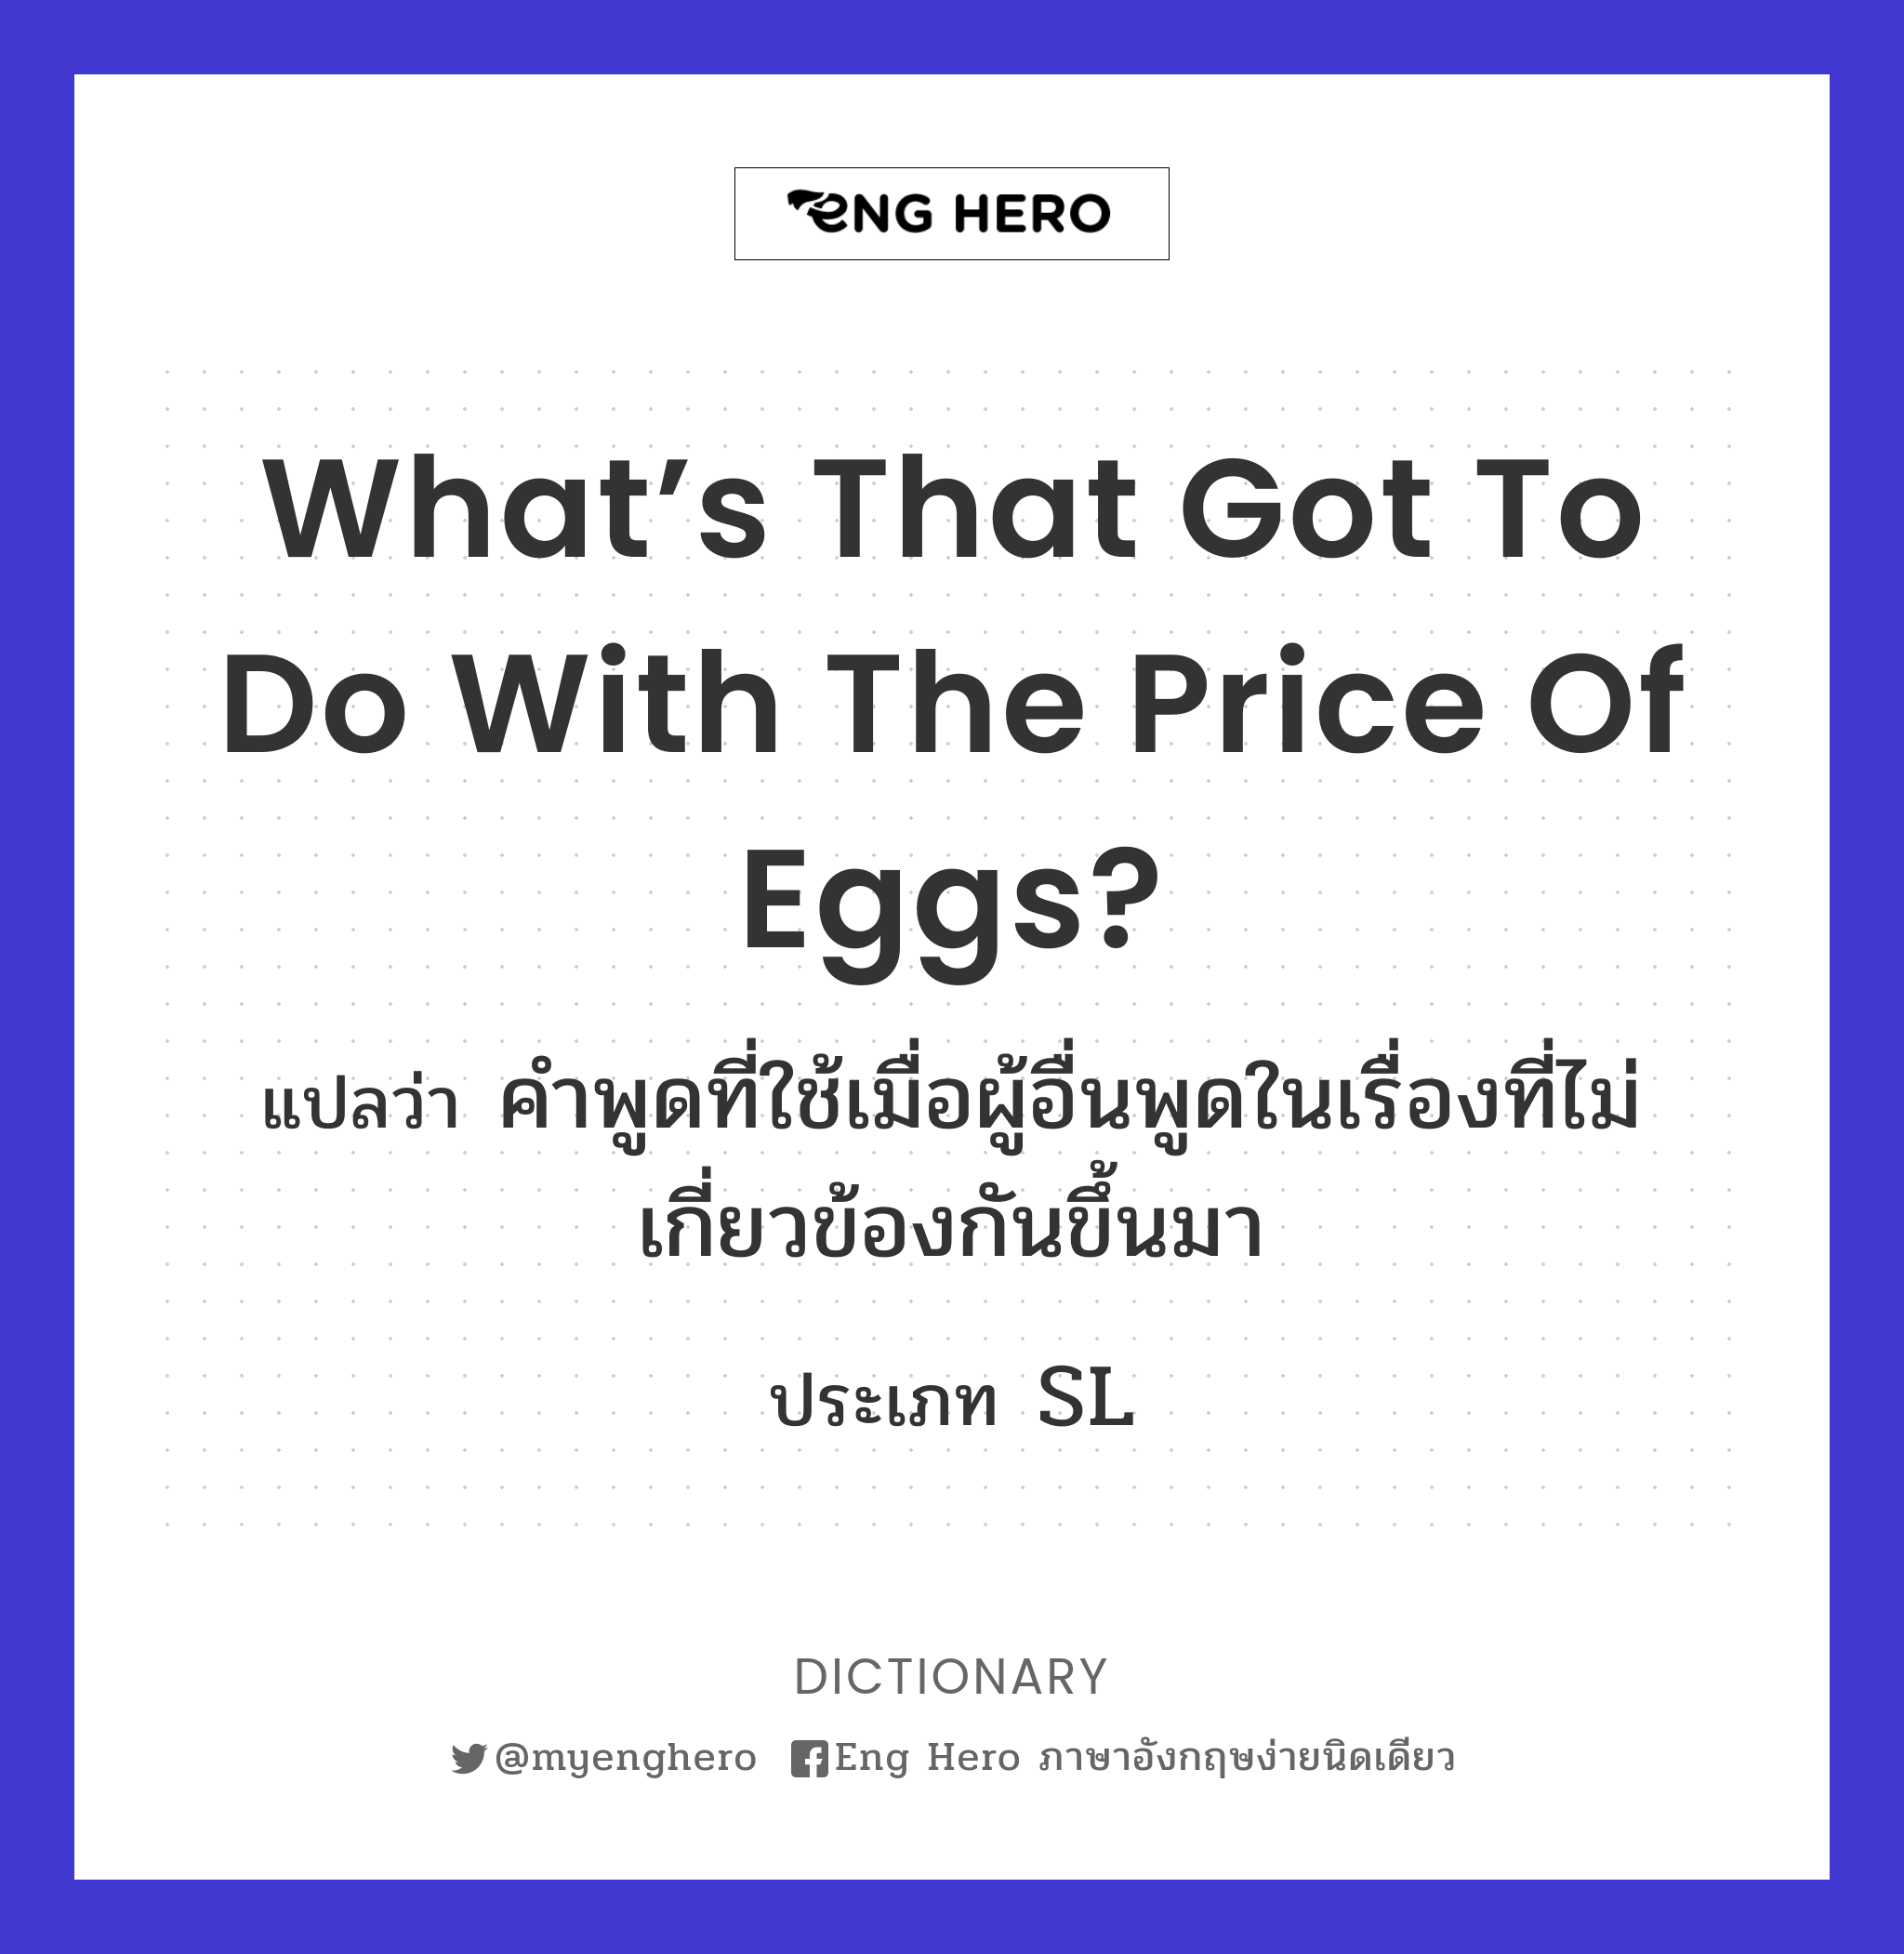 What’s that got to do with the price of eggs?